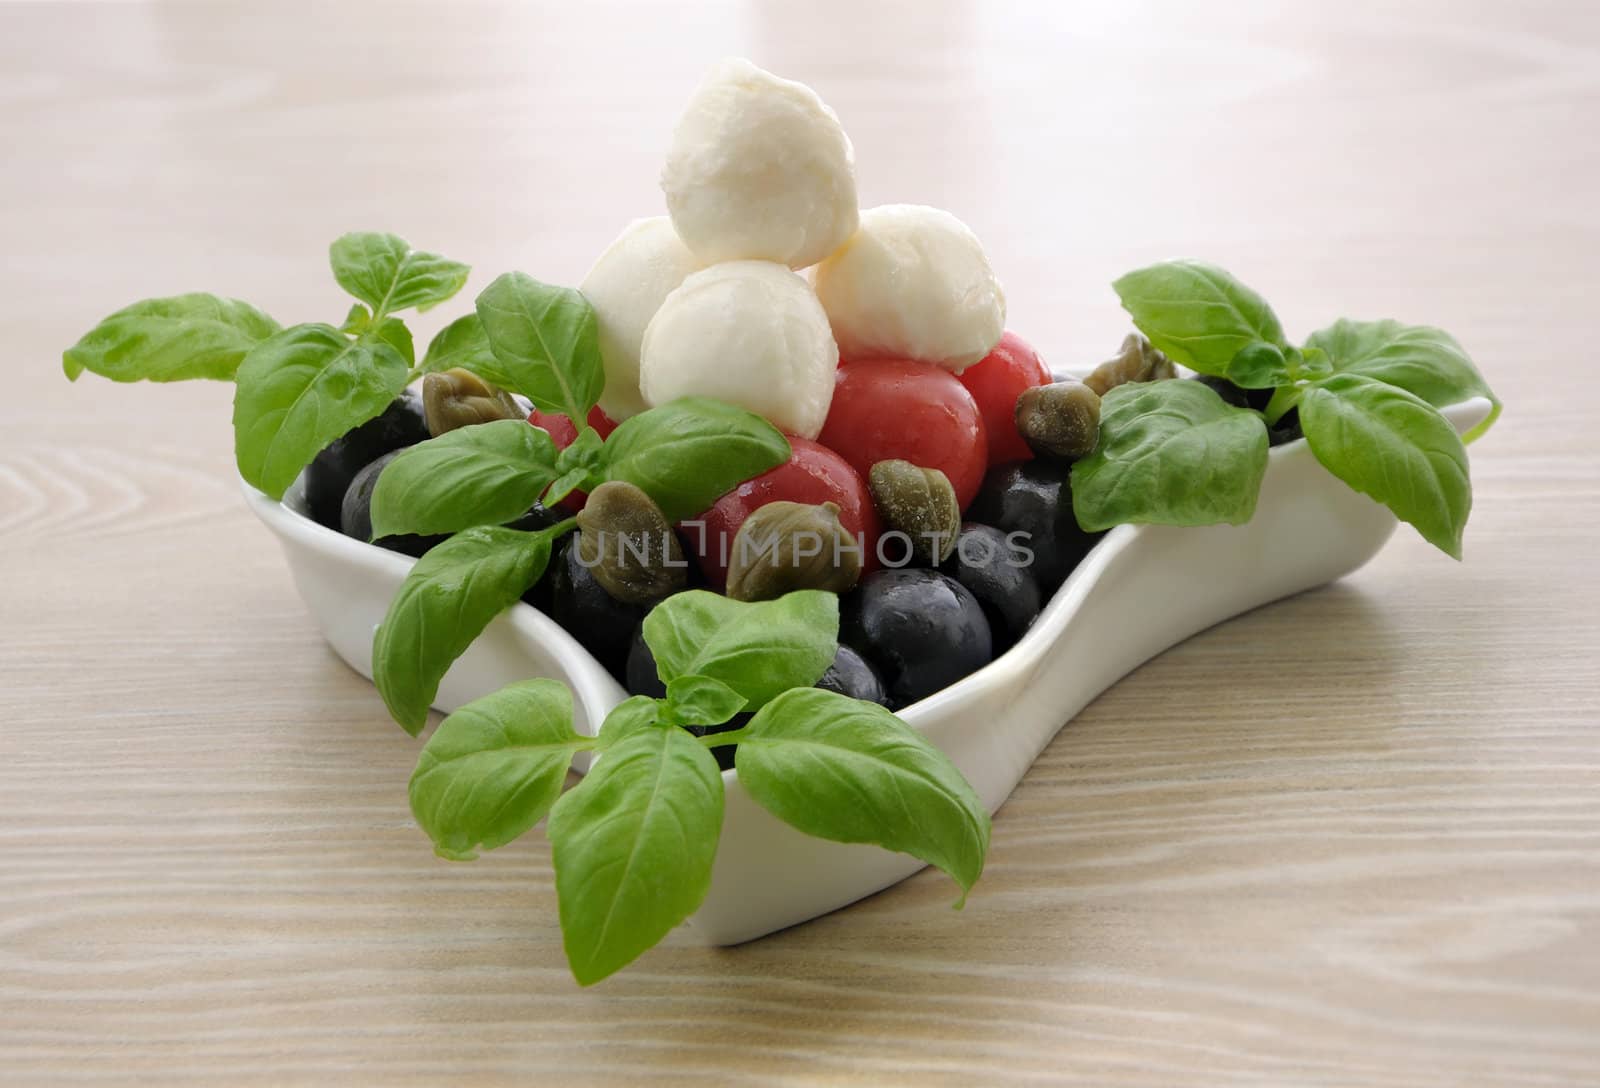 Appetizer of mozzarella, cherry tomatoes and olives, basil and capers